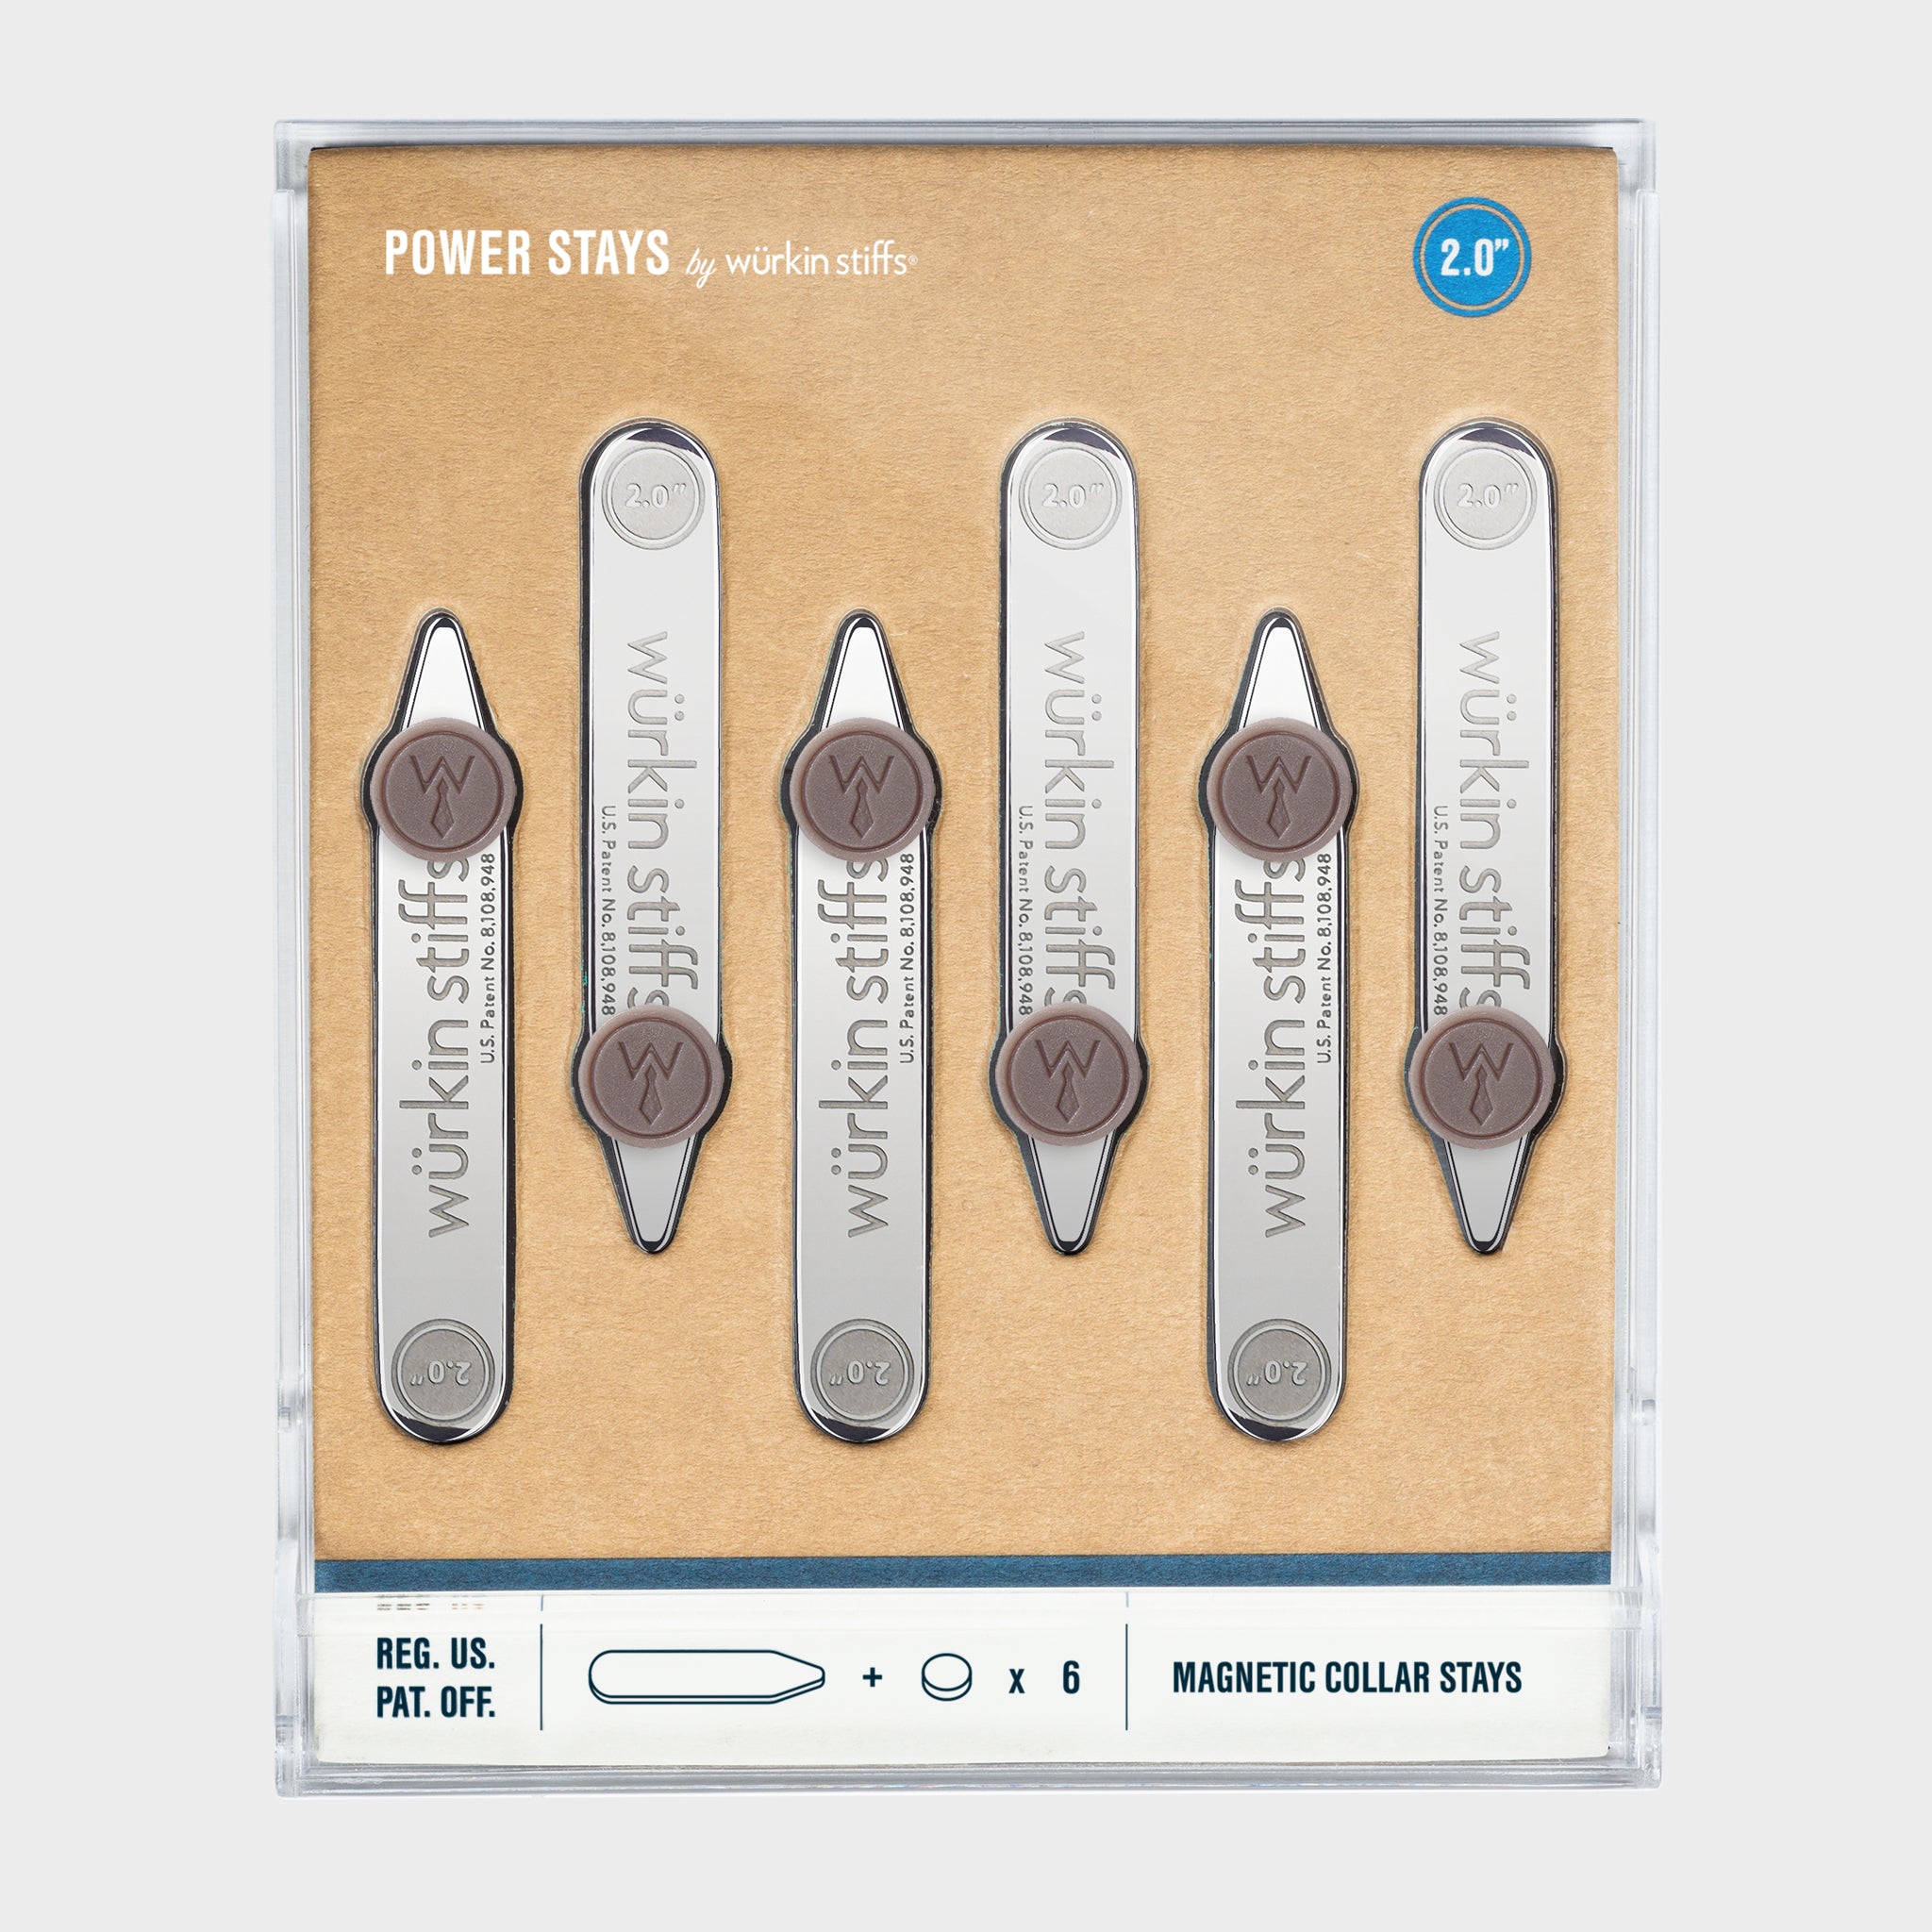 Wurkin Stiffs Magnetic Collar Stays come with tiny magnets to not only hold  your collar…